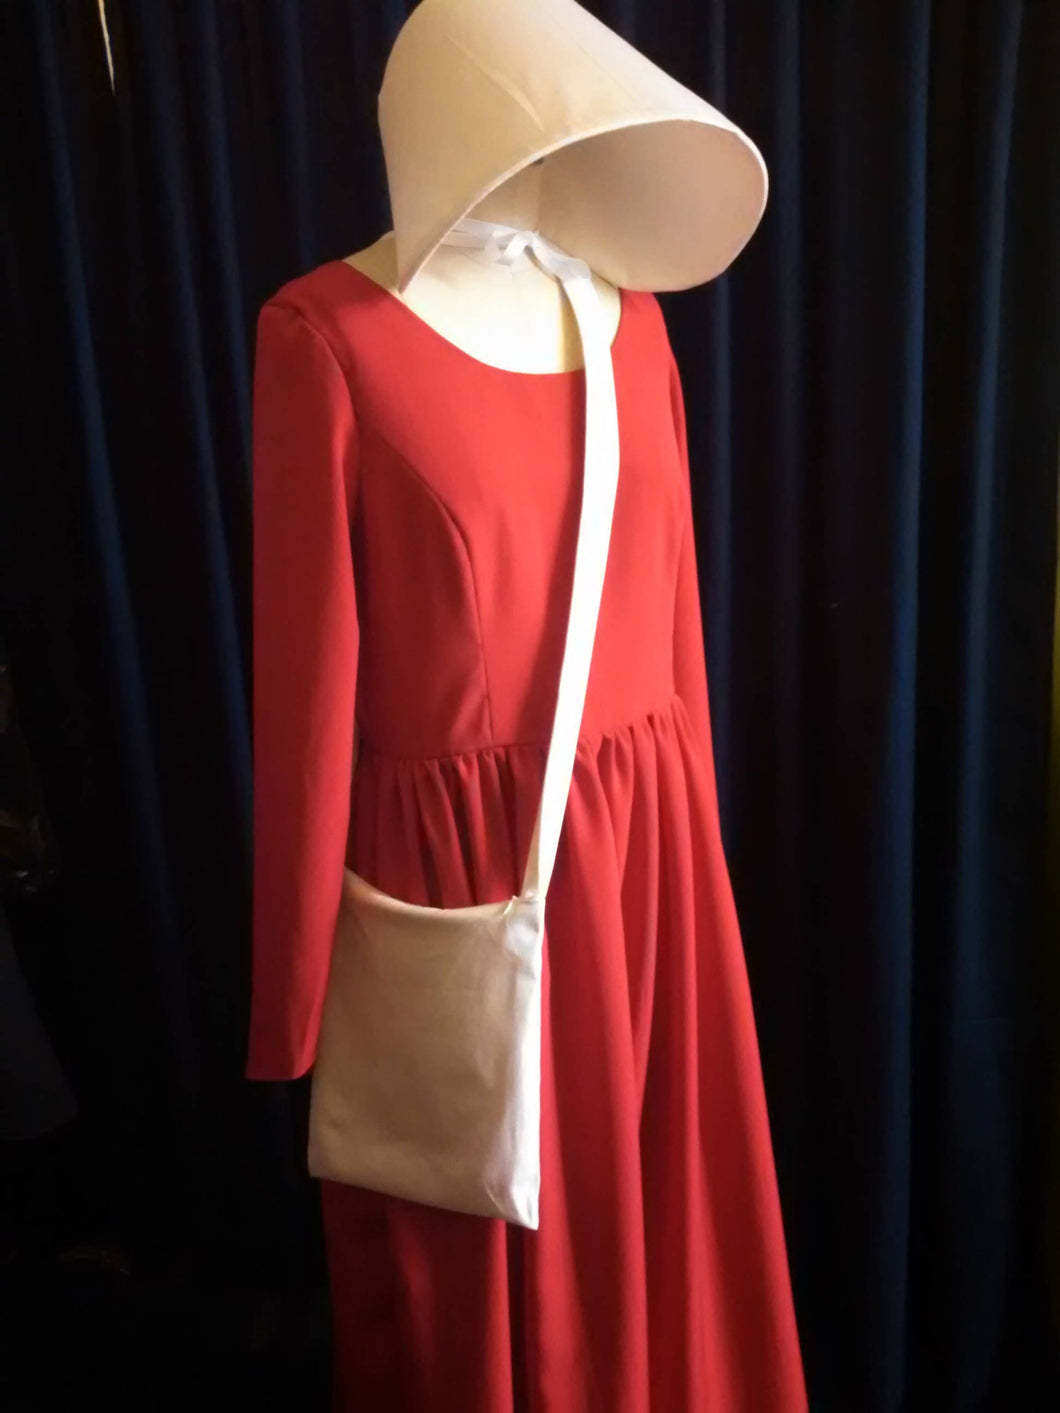 Handmaid's Tale Costume - Dress, bonnet, and bag. READY TO SHIP in small only, medium, and large only